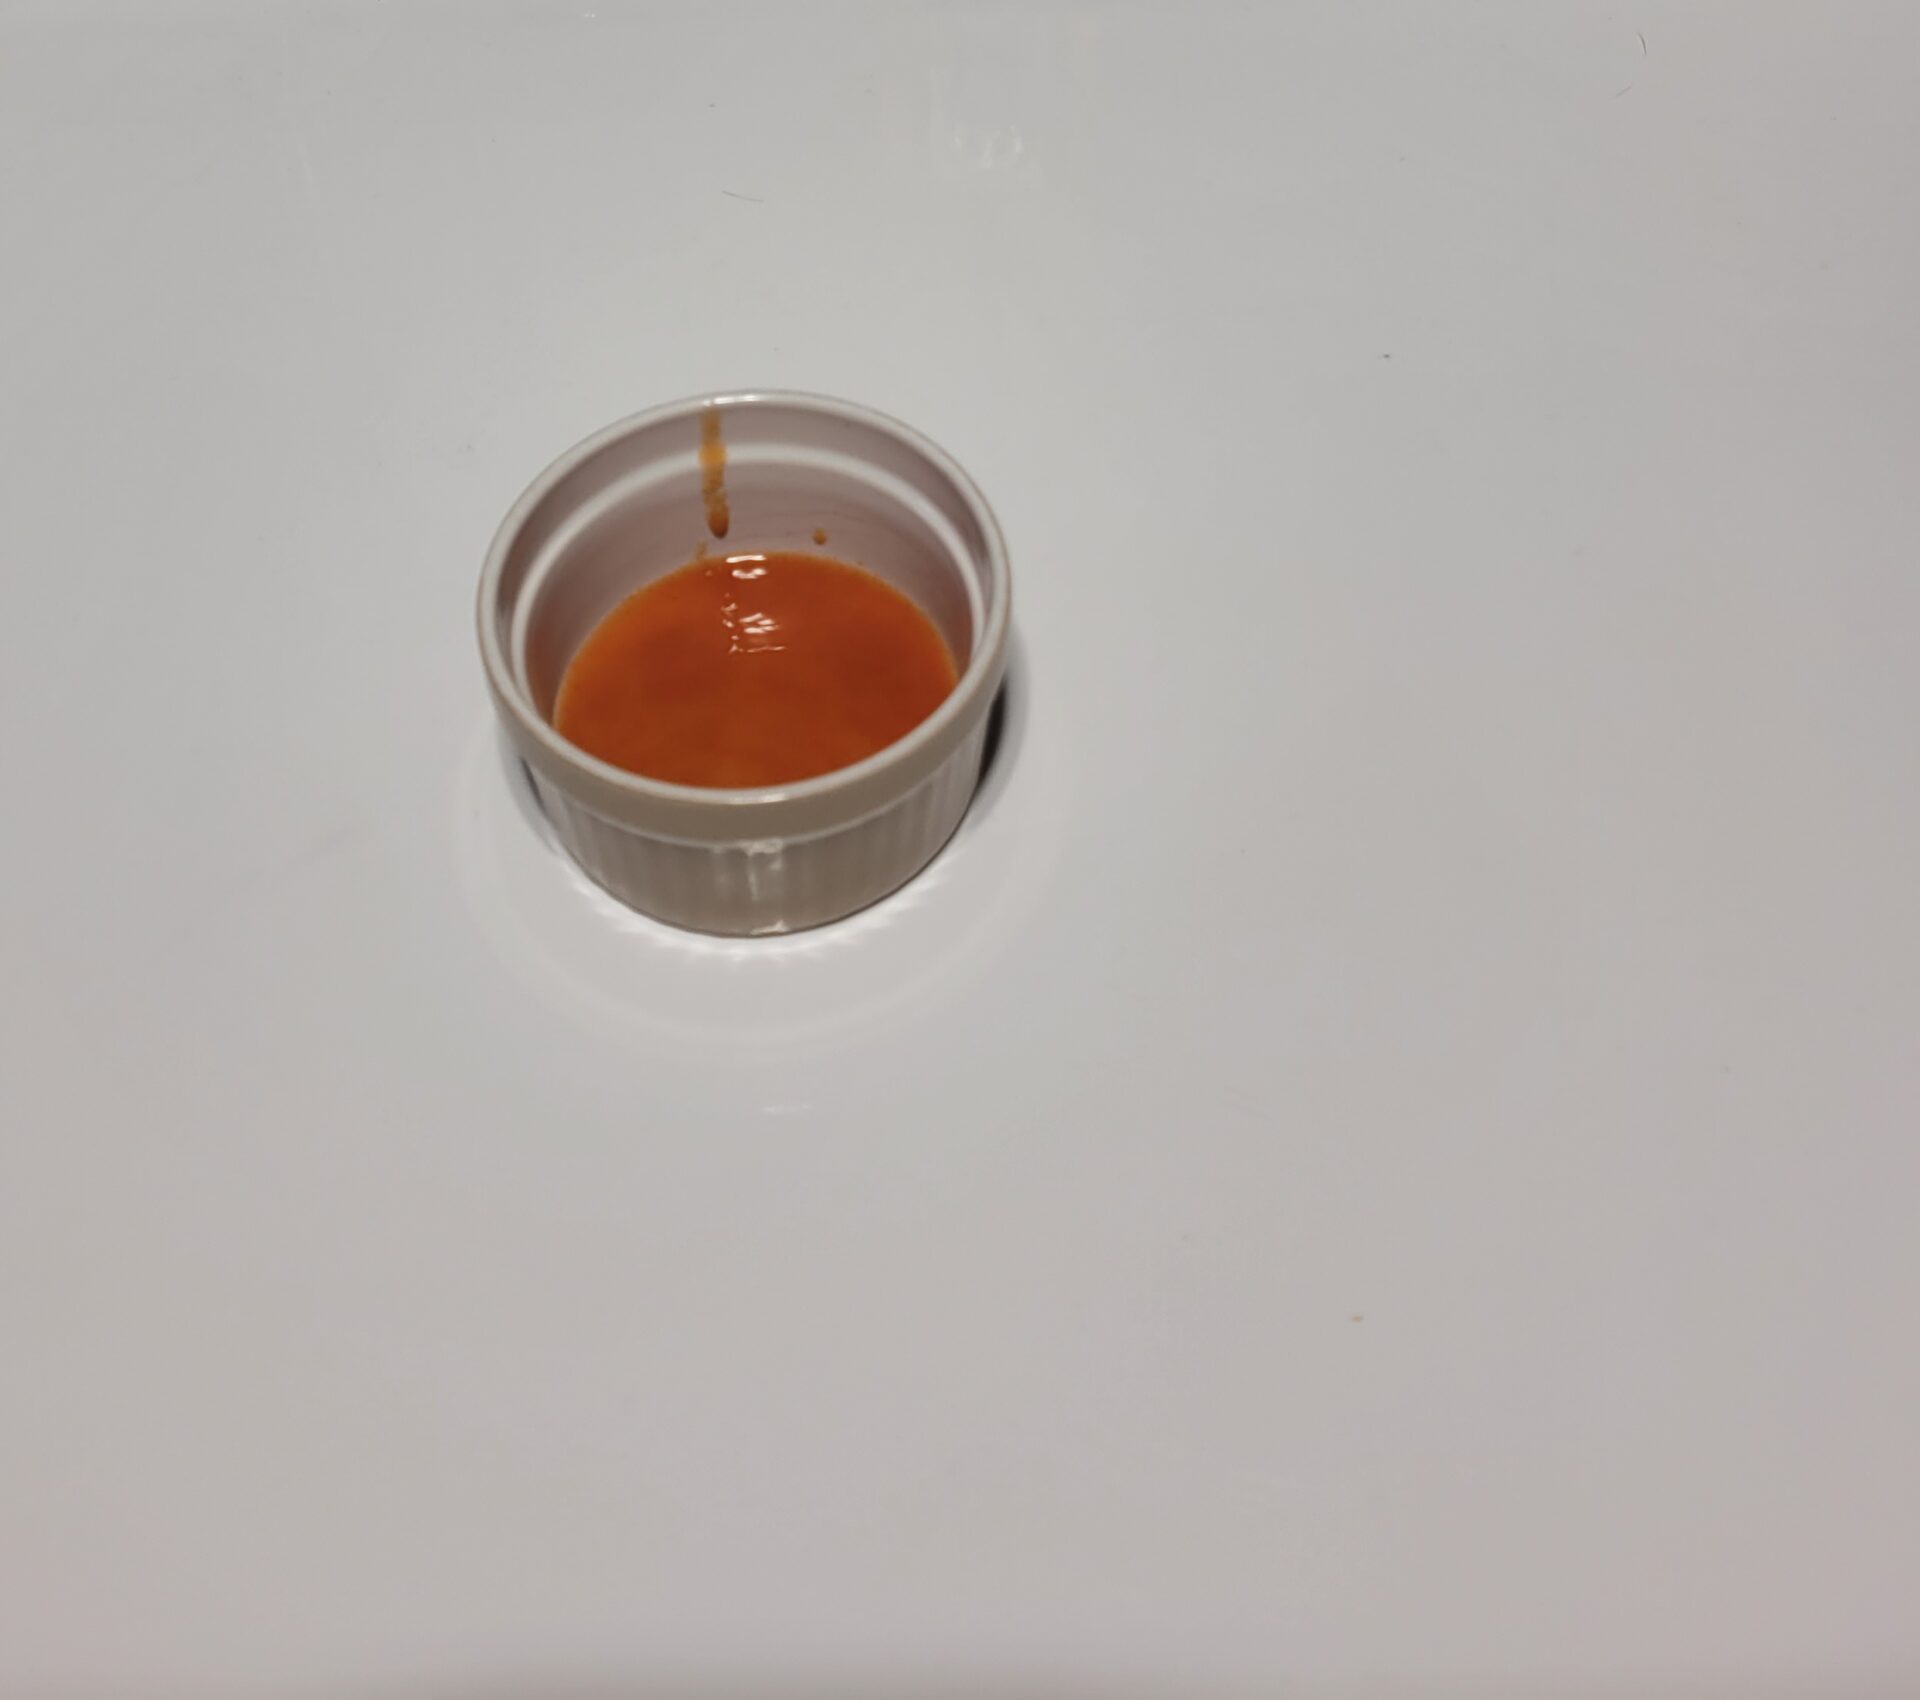 A small container of hot sauce on a white backdrop as an example of homemade hot sauce production number 85 on our list of backyard business ideas